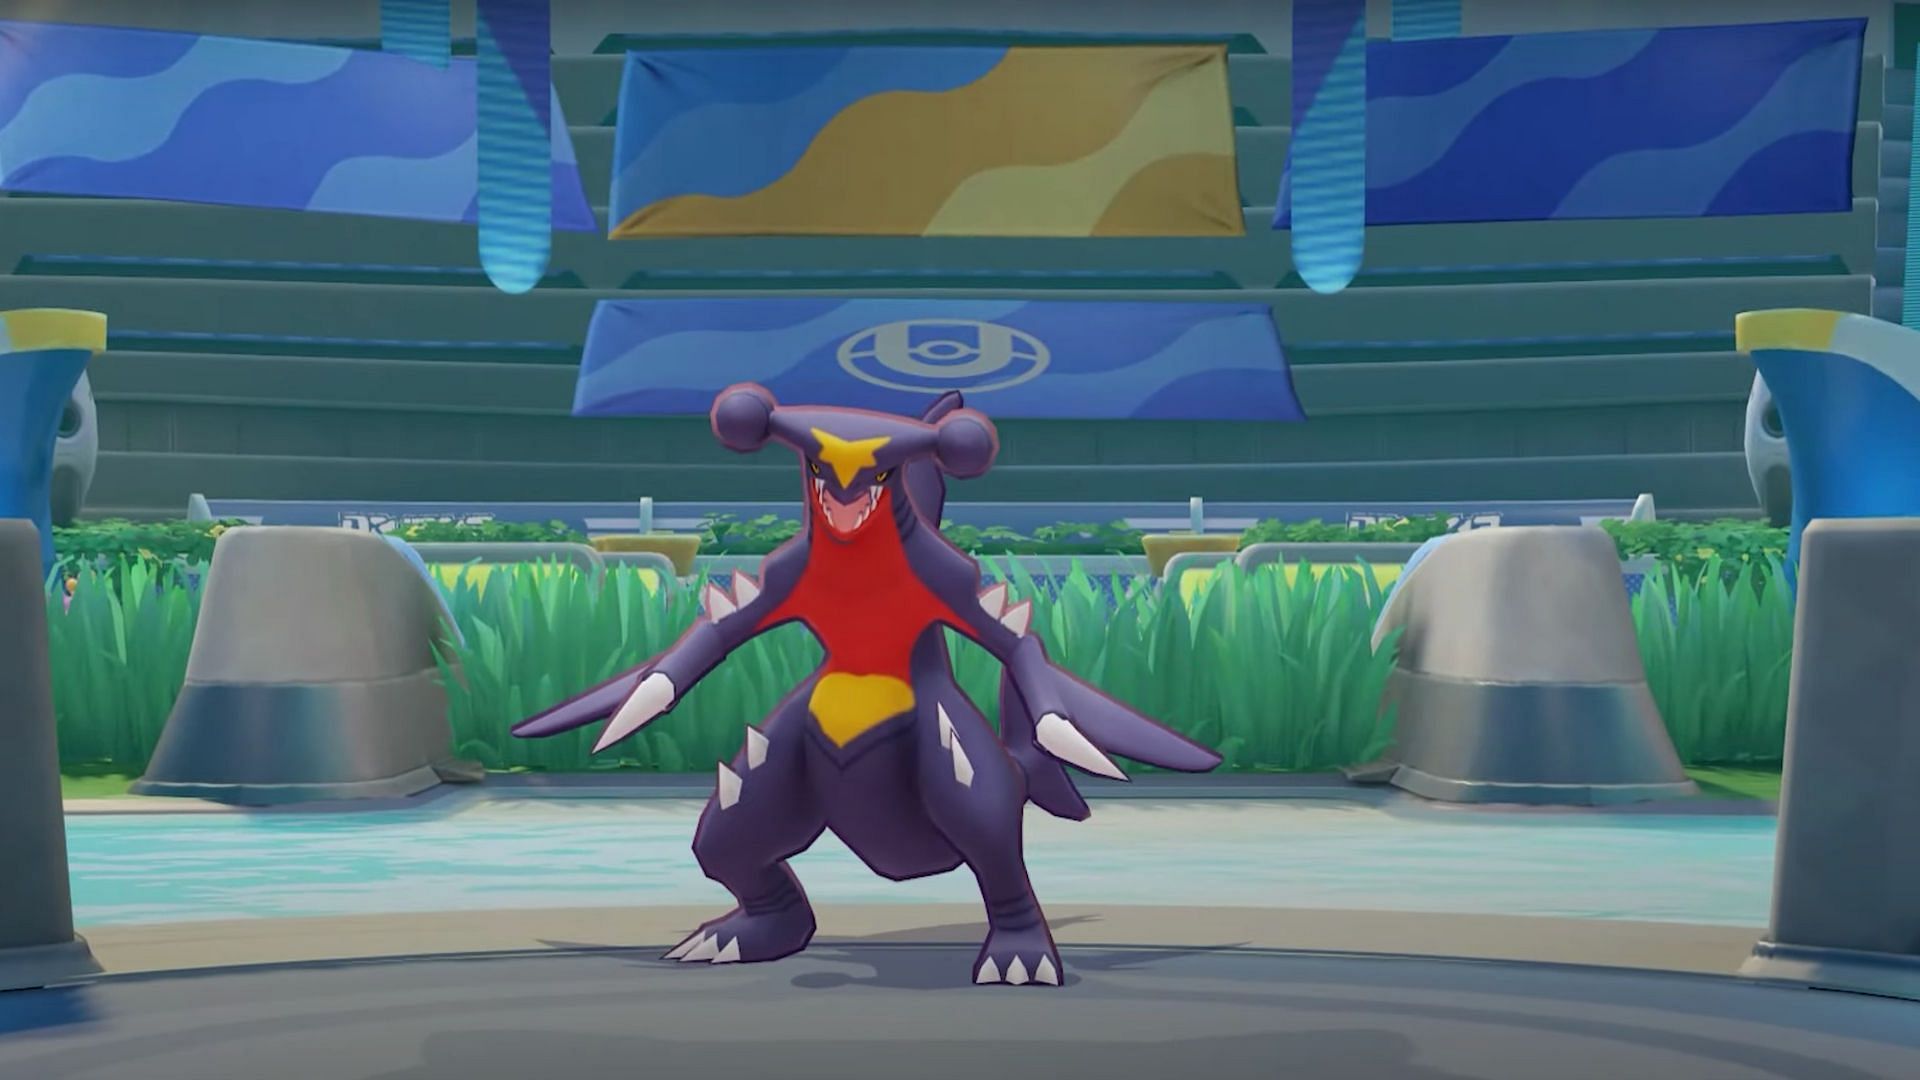 Garchomp is one of the most powerful Pokemon in the Sinnoh region (Image via TiMi Studios)